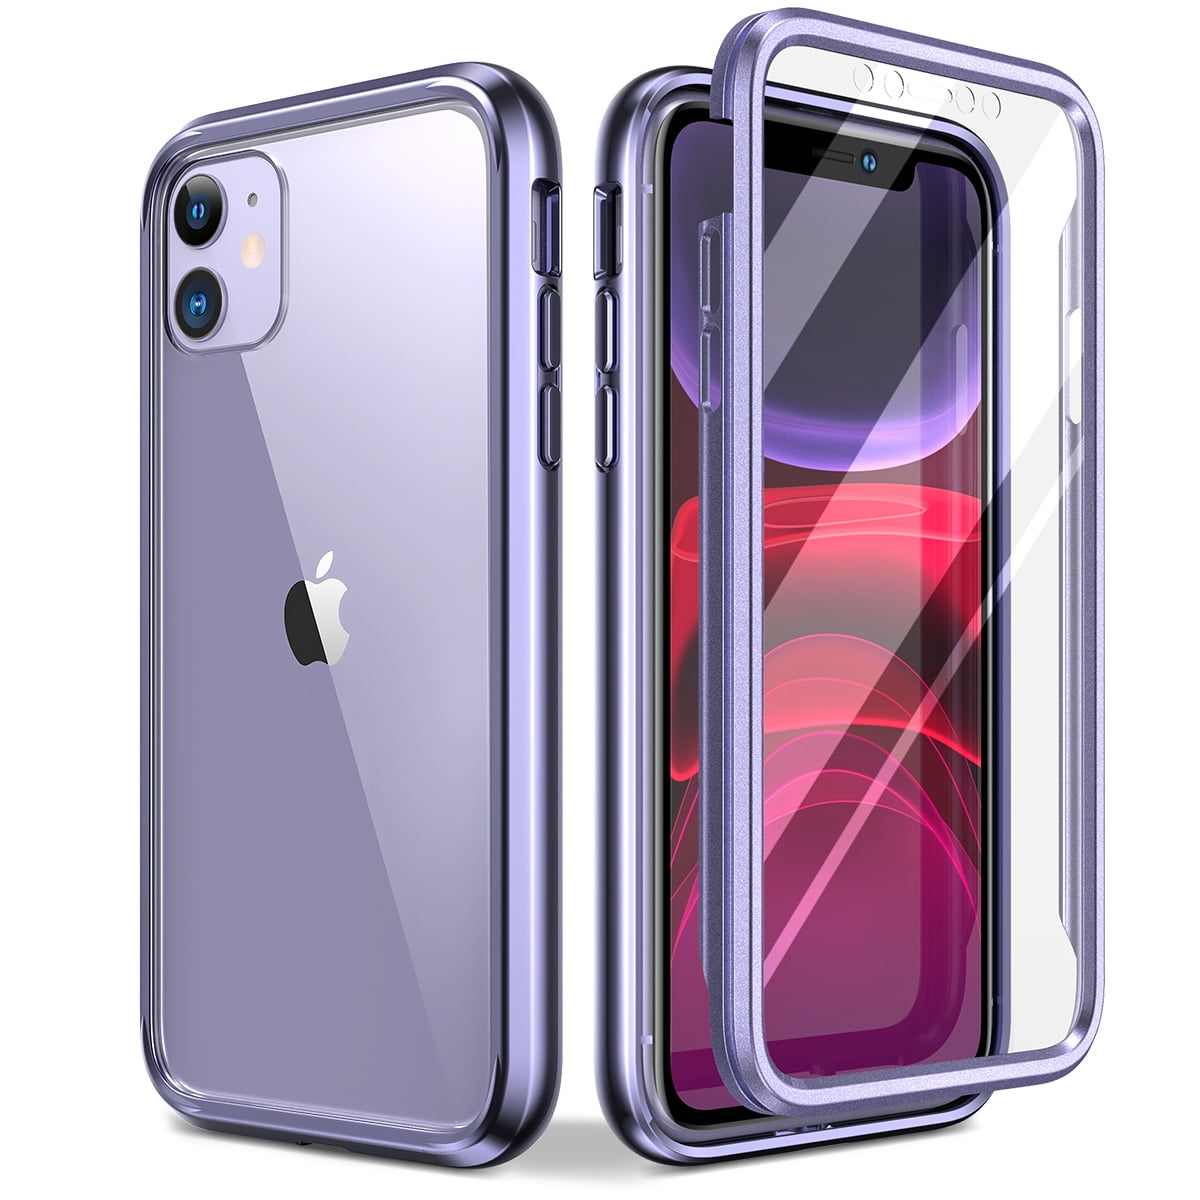 Suritch Clear Case For Iphone 11 Built In Screen Protector Tempered Glass Back Shockproof Full Body Protection Hard Defender Hybrid Soft Silicone Bumper Crystal Case For Iphone 11 6 1 Purple Walmart Com